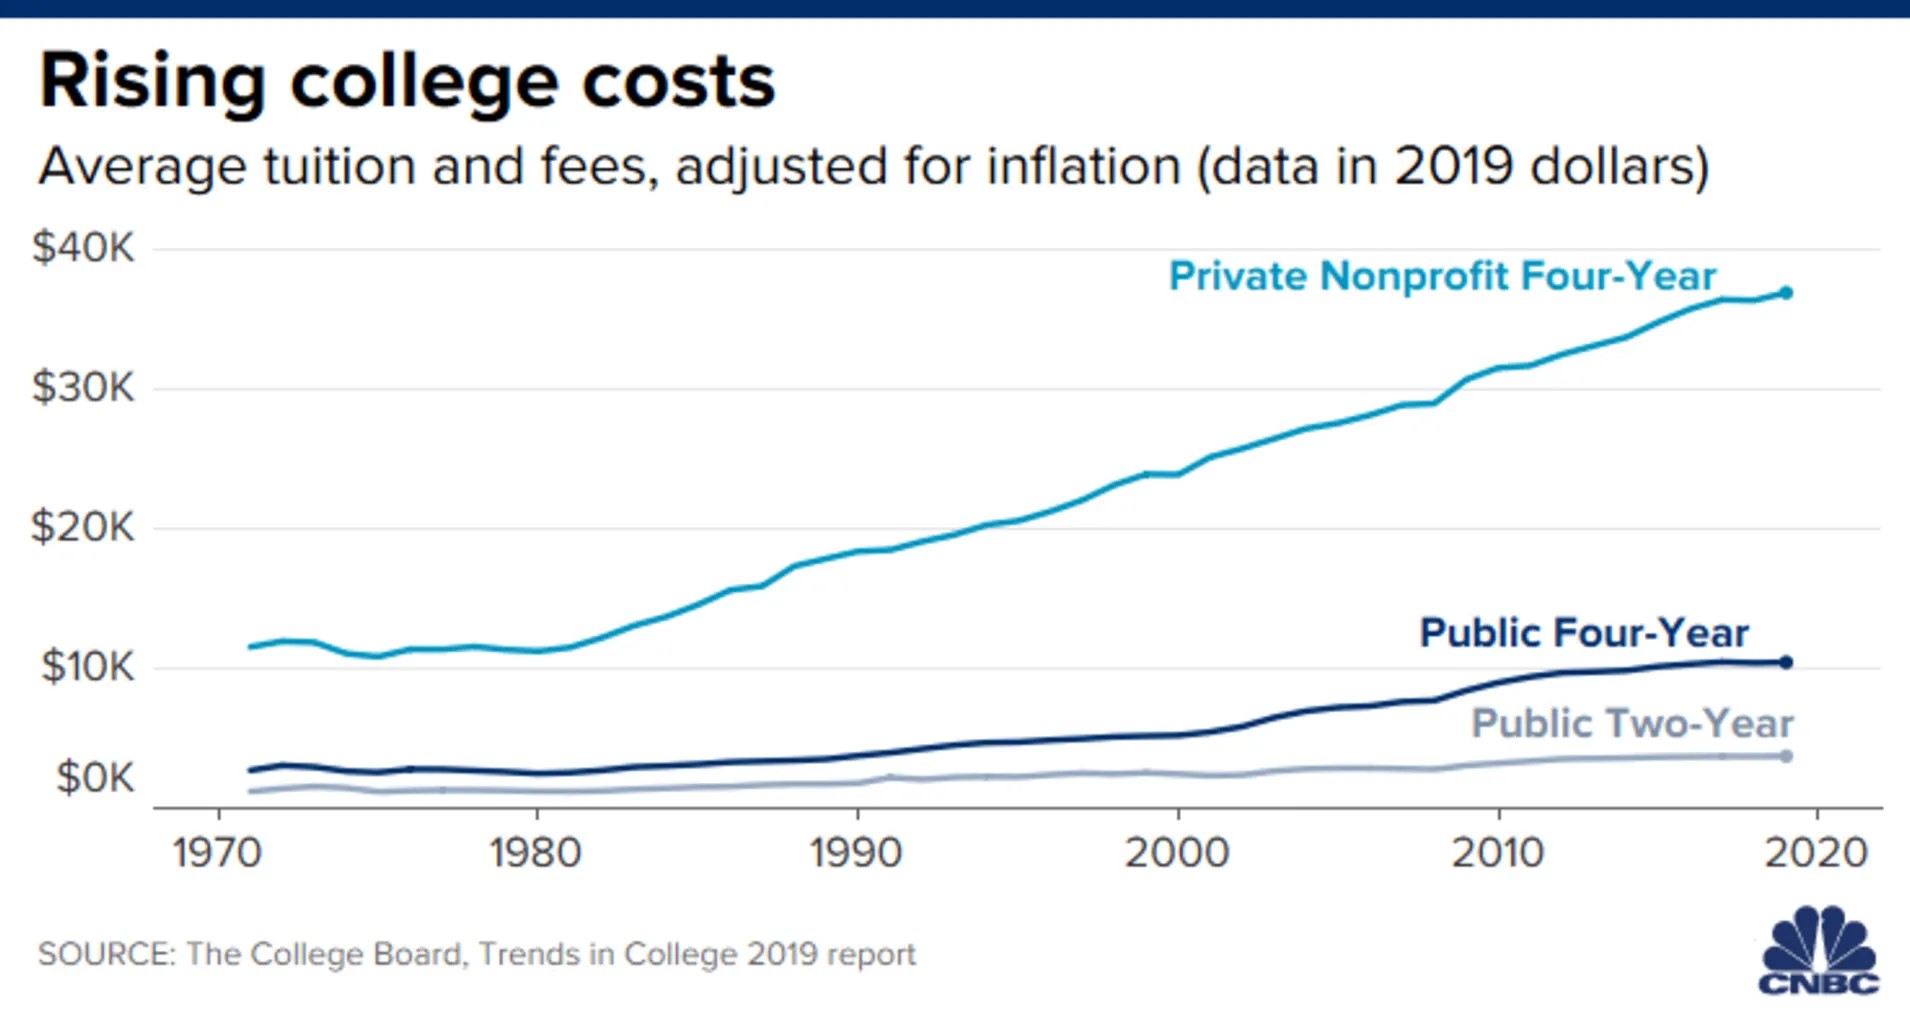 cost of private education in bright blue, public four-year in dark blue, and public two-year in grey/blue